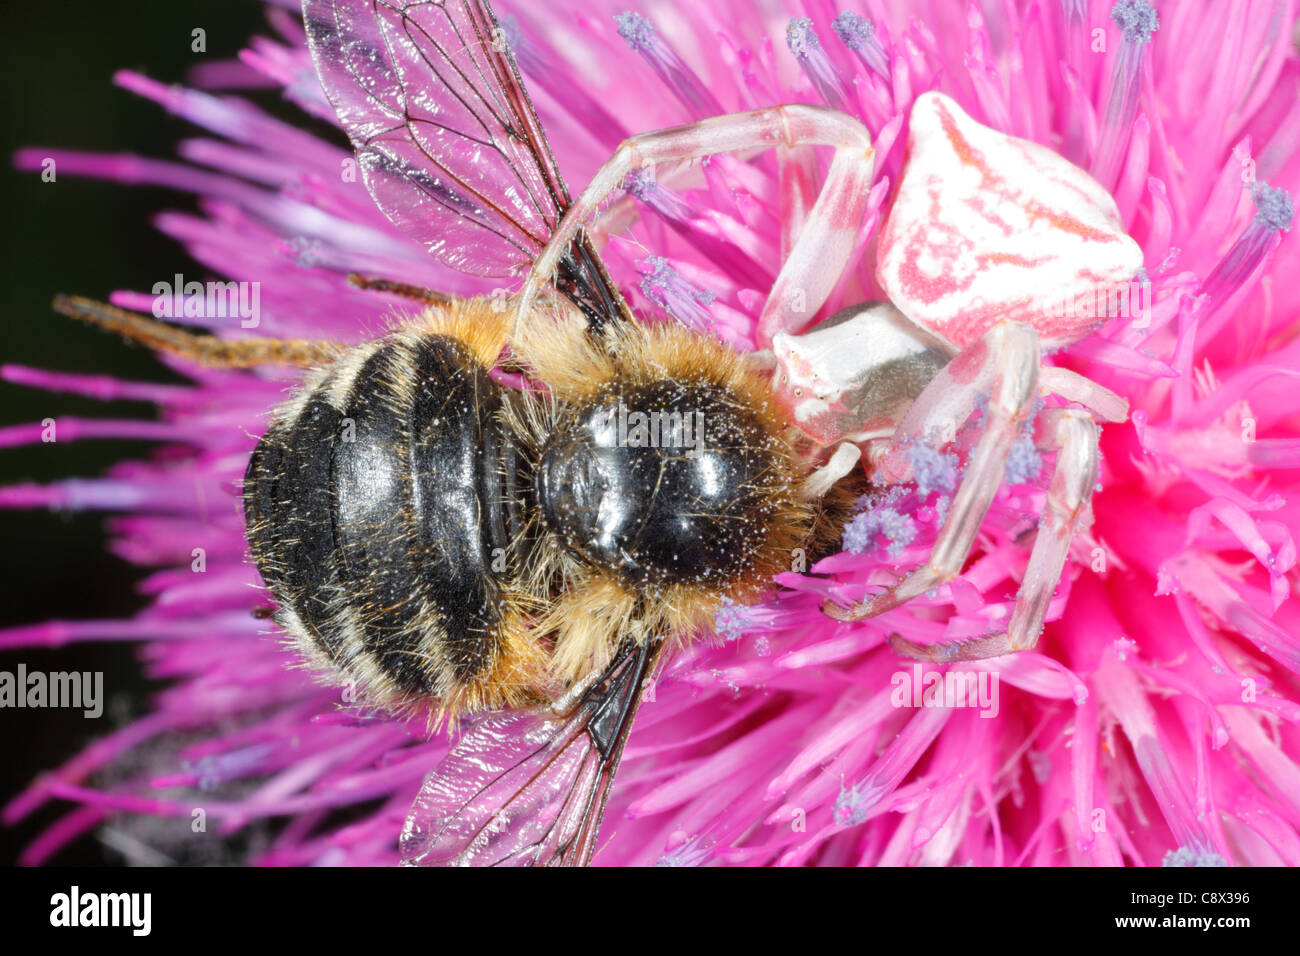 Pink Crab Spider (Thomisus onustus) feeding on a Bee-fly (Fallenia fasciata) in a pink flower. Stock Photo